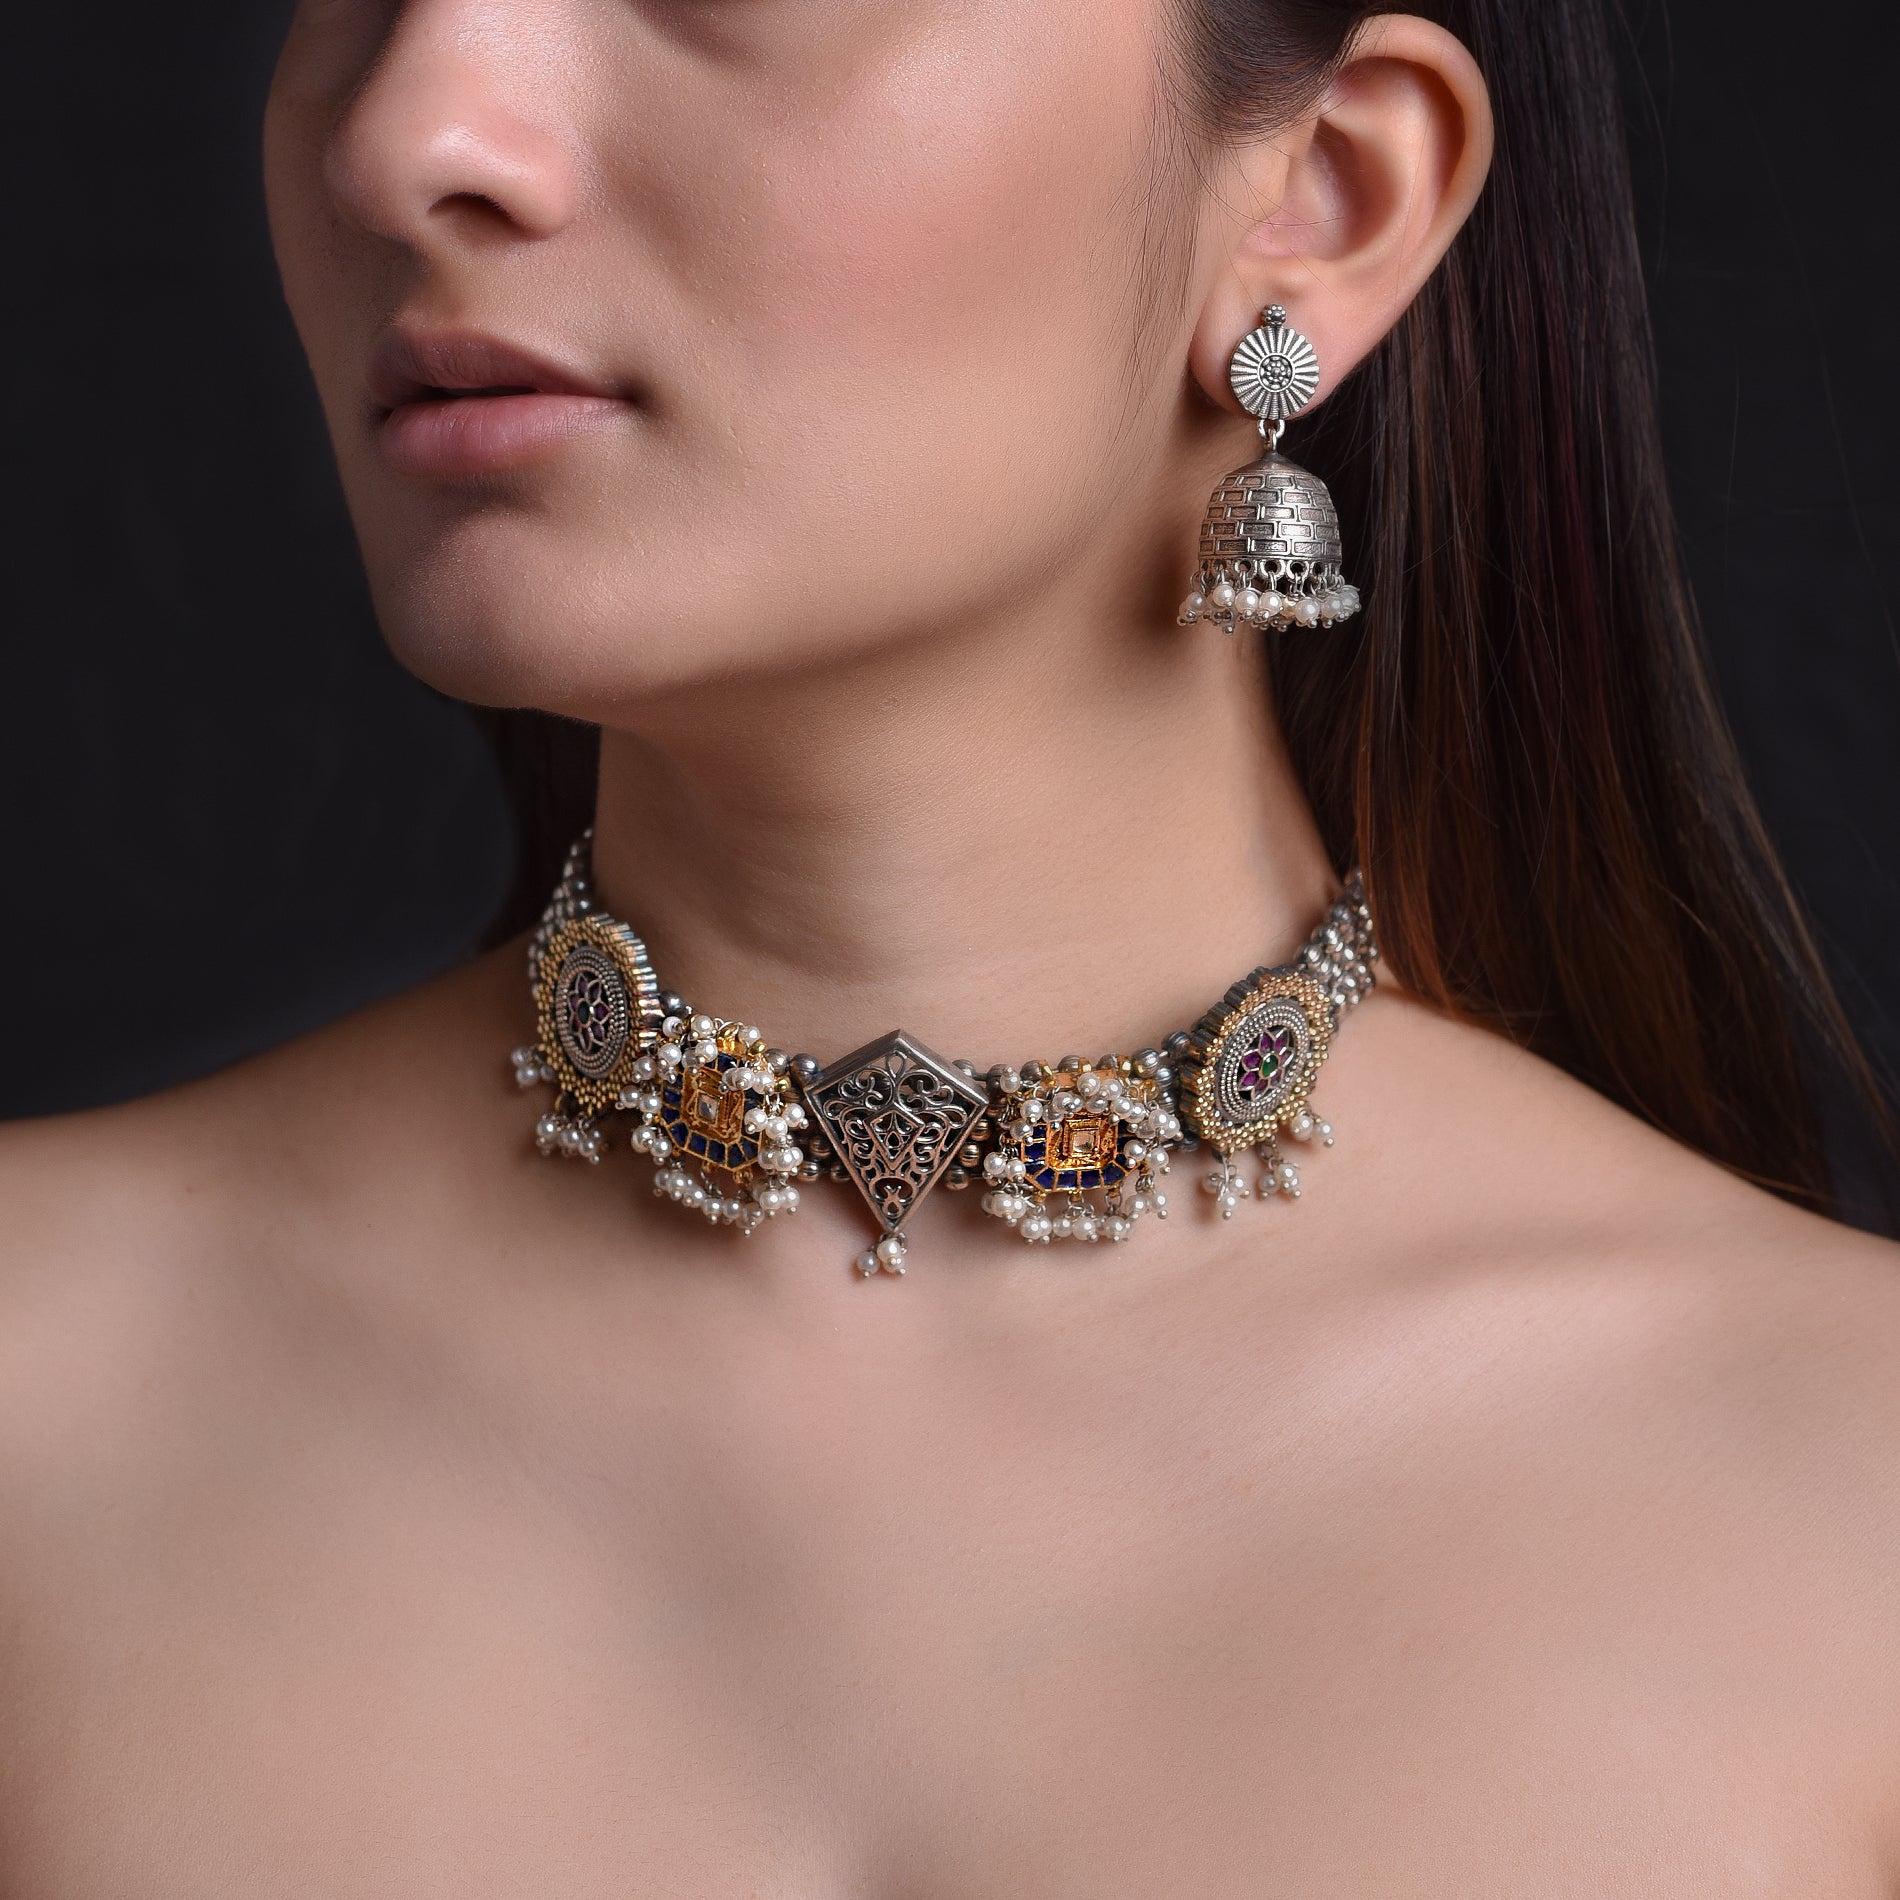 Limited Edition German Silver Choker with Kundan Pieces and Jhumka Earrings